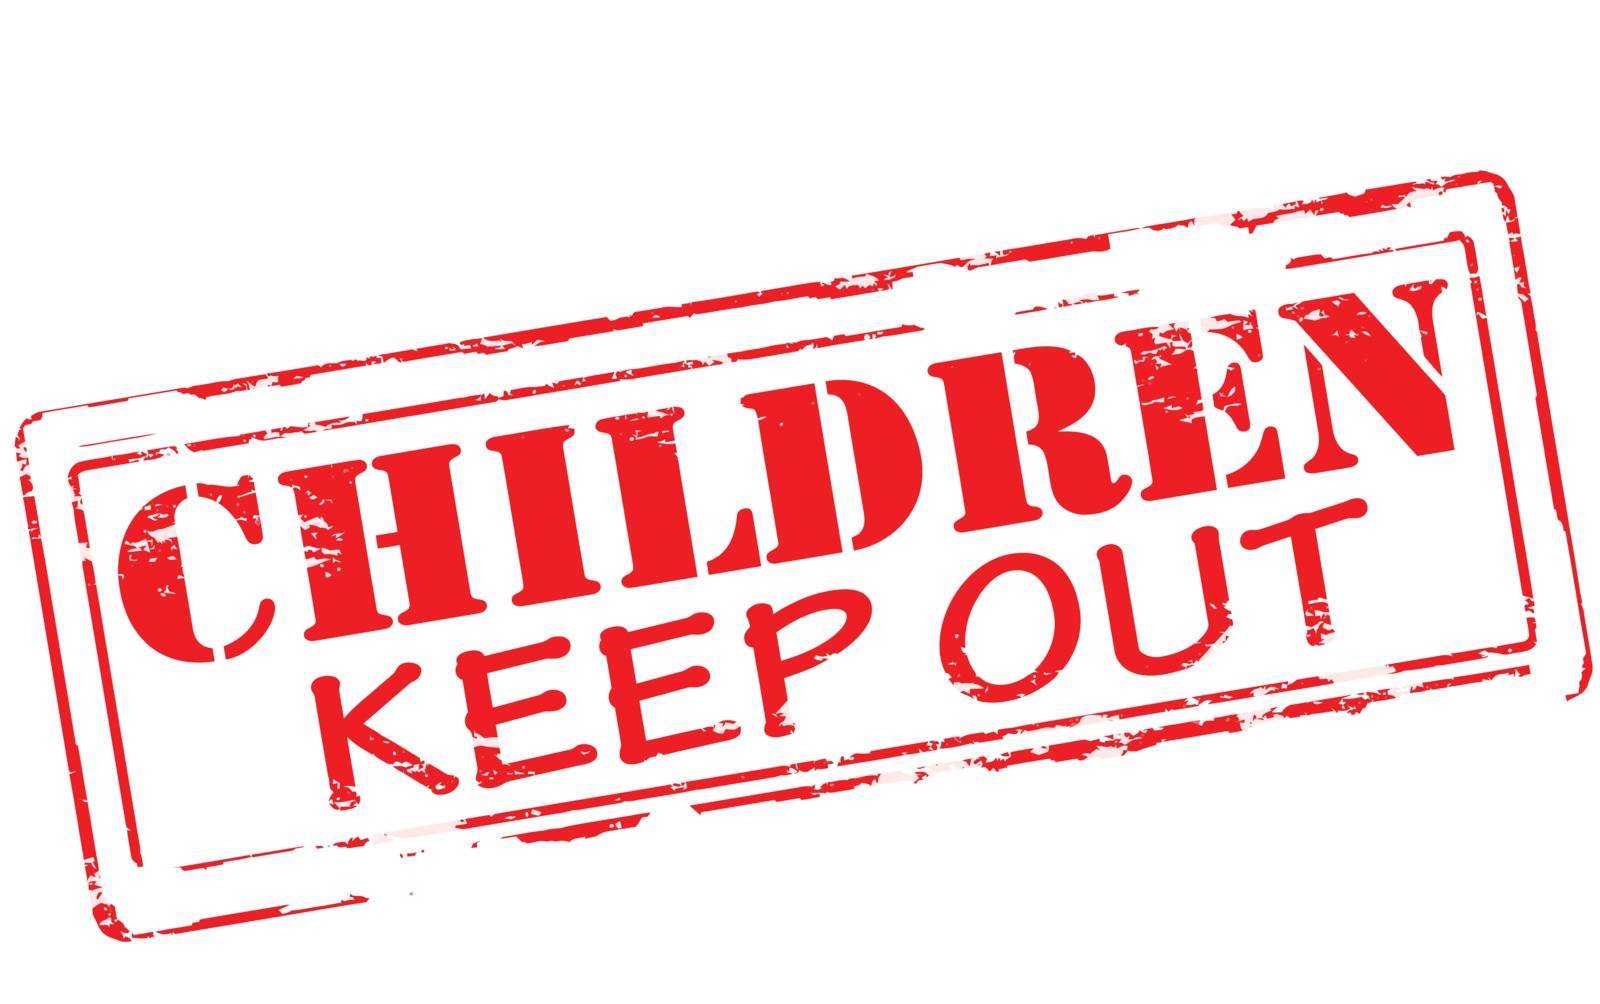 Children keep out by carmenbobo